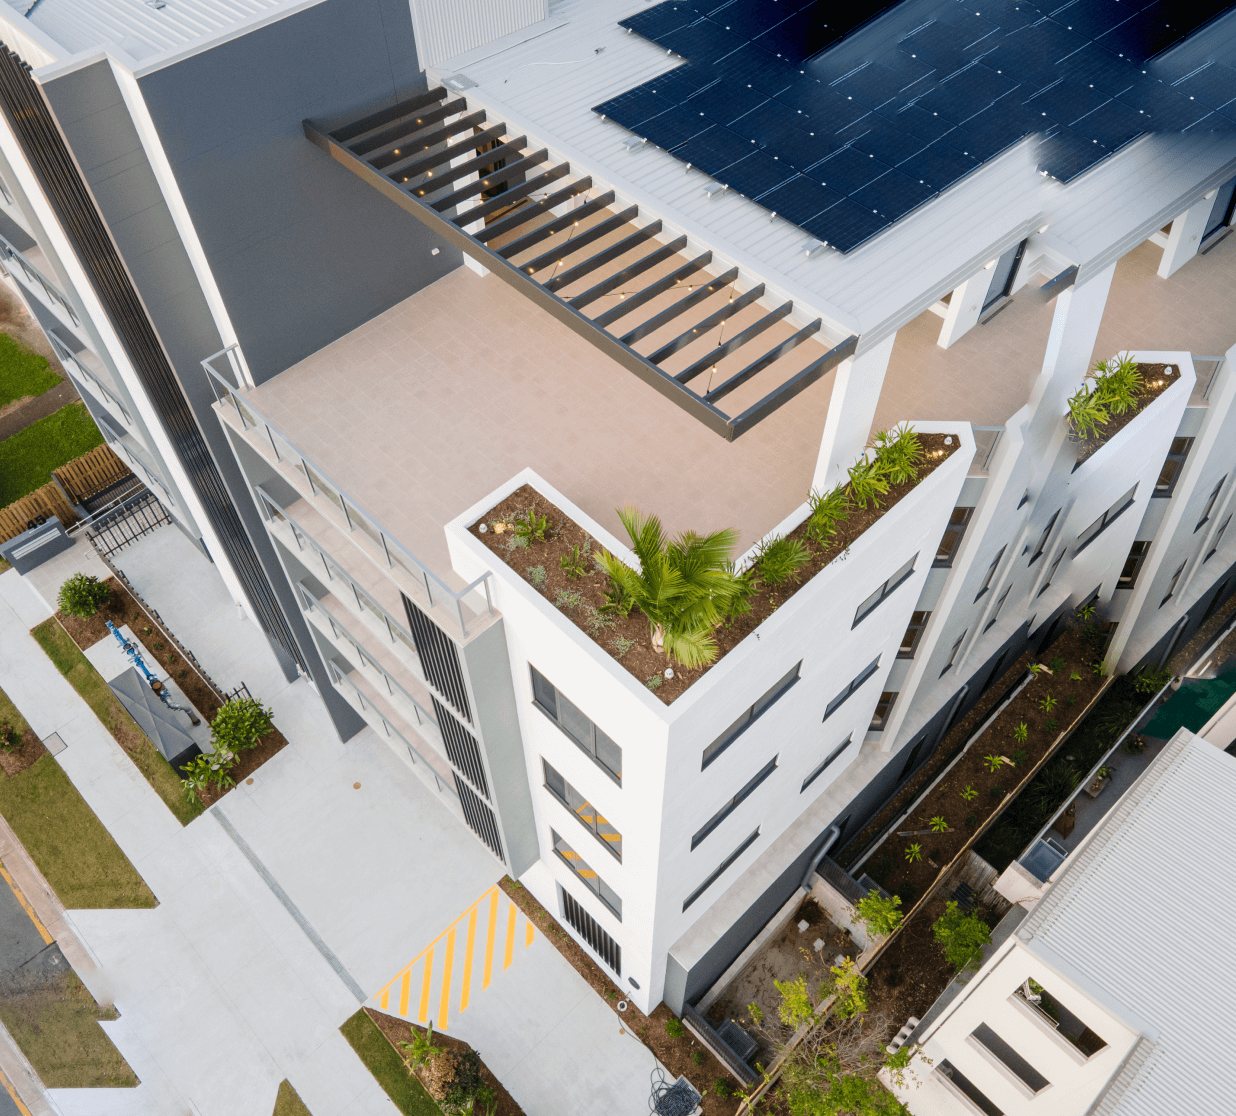 Angled aerial perspective photo of an off white coloured modern residential 6 story building during the day. There are garden beds around the foot of the building and on a roof terrace seen at the centre of the photo. There are balconies at the front of the building, with steel framed glass railings. There are solar panels on the terrace rooftop and the terrace and balconies have cream coloured tiles. In the bottom left of the photo there is a driveway which leads to a carpark out of sight. There is also a concrete walkway across the entrance to the carpark, with a warning strip painted on it. Some plant equipment can be seen in the garden bed adjacent to the driveway. There are wooden paled fences up two sides of the perimeter of the block. There are steel bar fences dividing footpaths from garden beds.